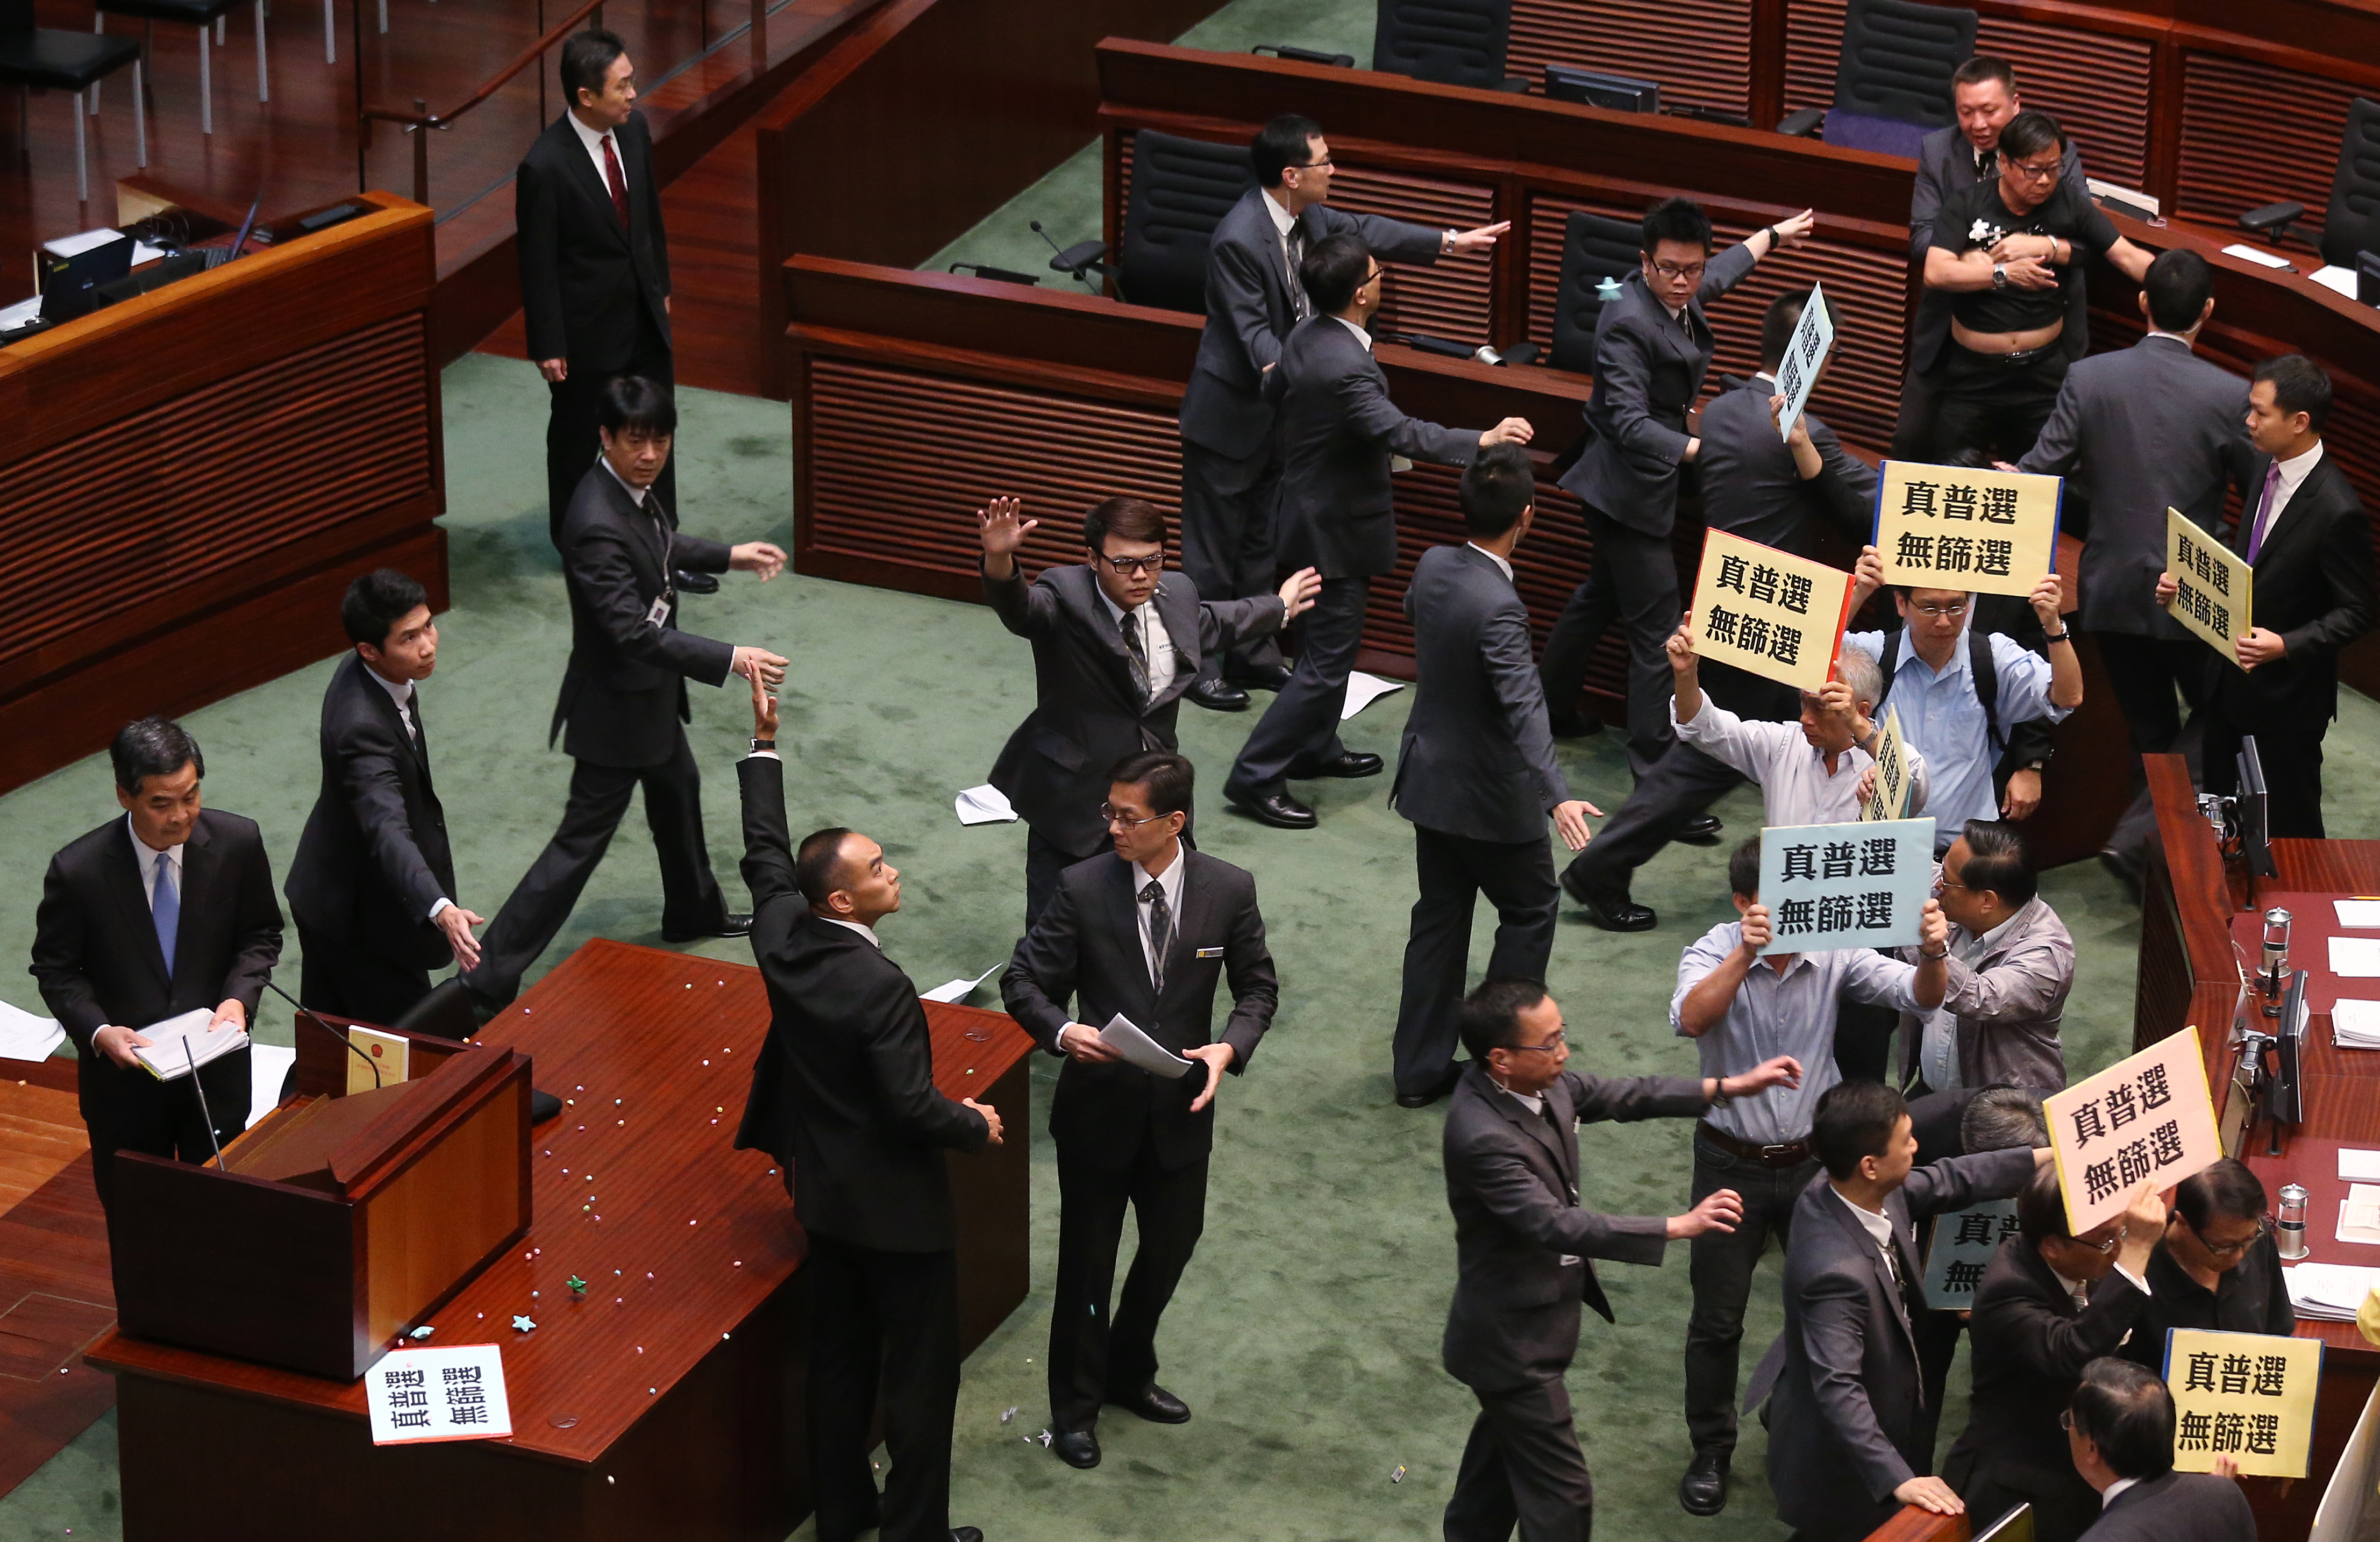 Lawmaker Wong Yuk-man (top, 3rd right) throws a glass and documents to Chief Executive Leung Chun-ying during Chief Executive Question and Answer Session at Legco Building in Tamar. 03JUL14